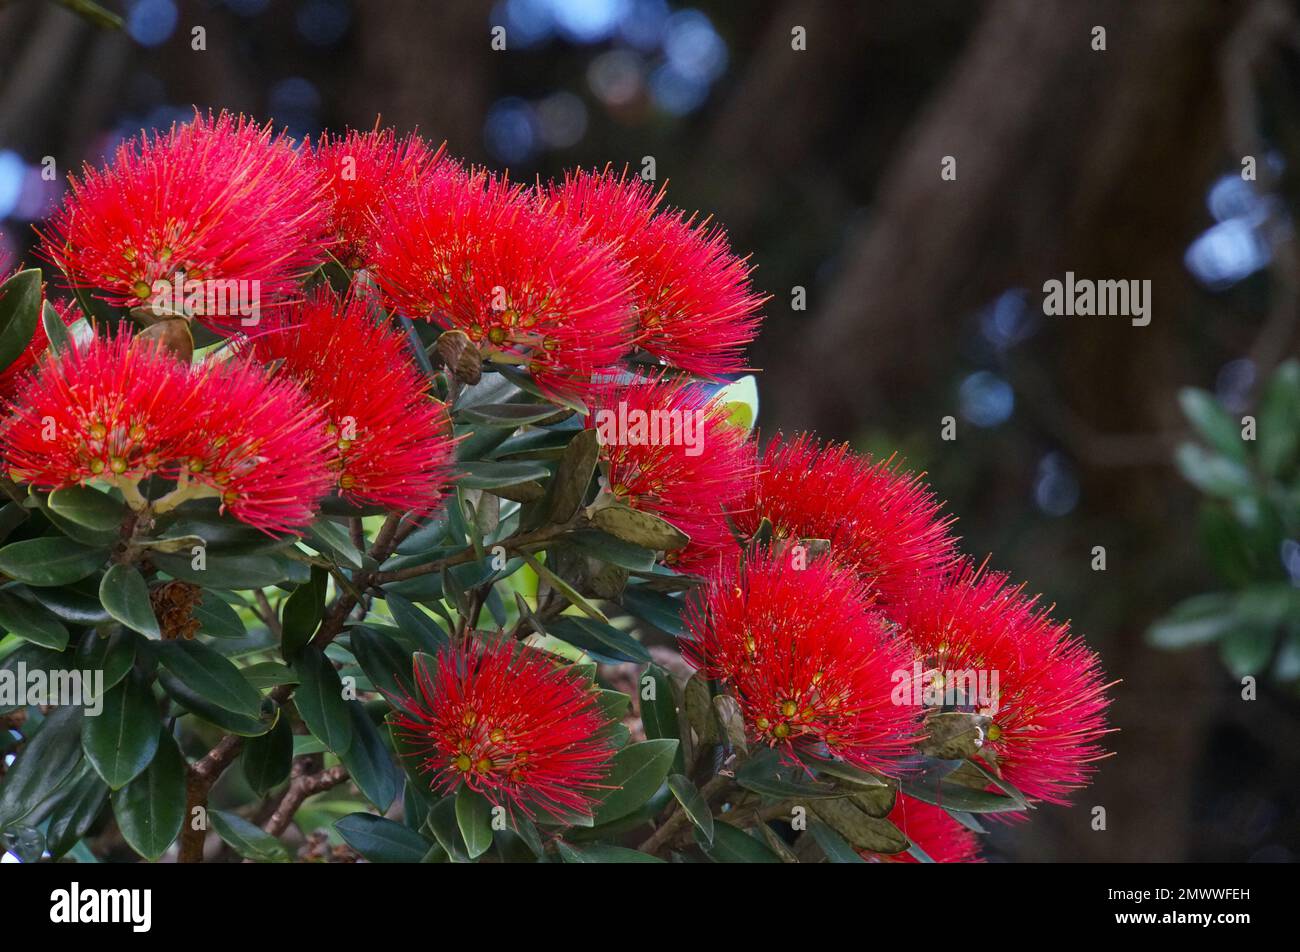 A Close-Up of the Pohutukawa flower (Metrosideros excelsa), also known as the New Zealand Christmas Tree Stock Photo